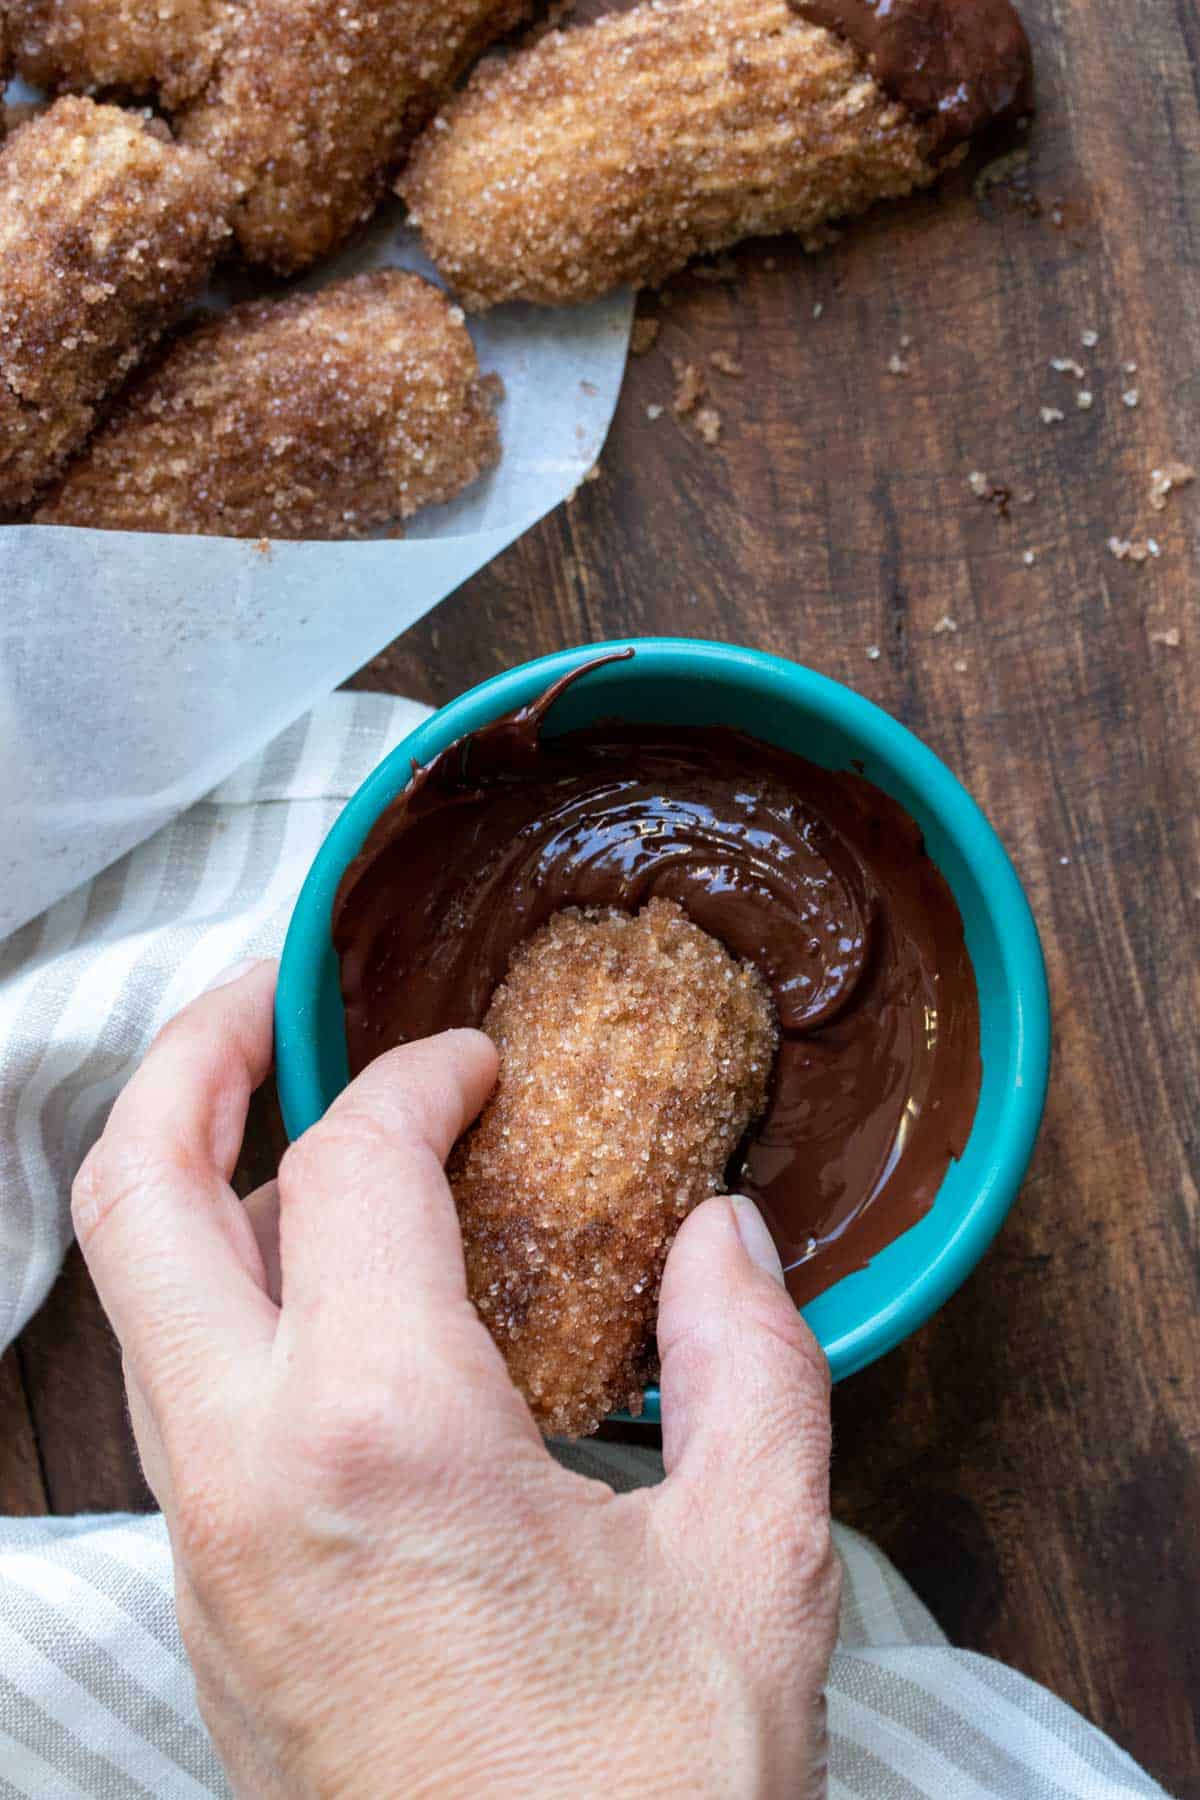 Hand dipping a churro piece in a bowl of melted chocolate